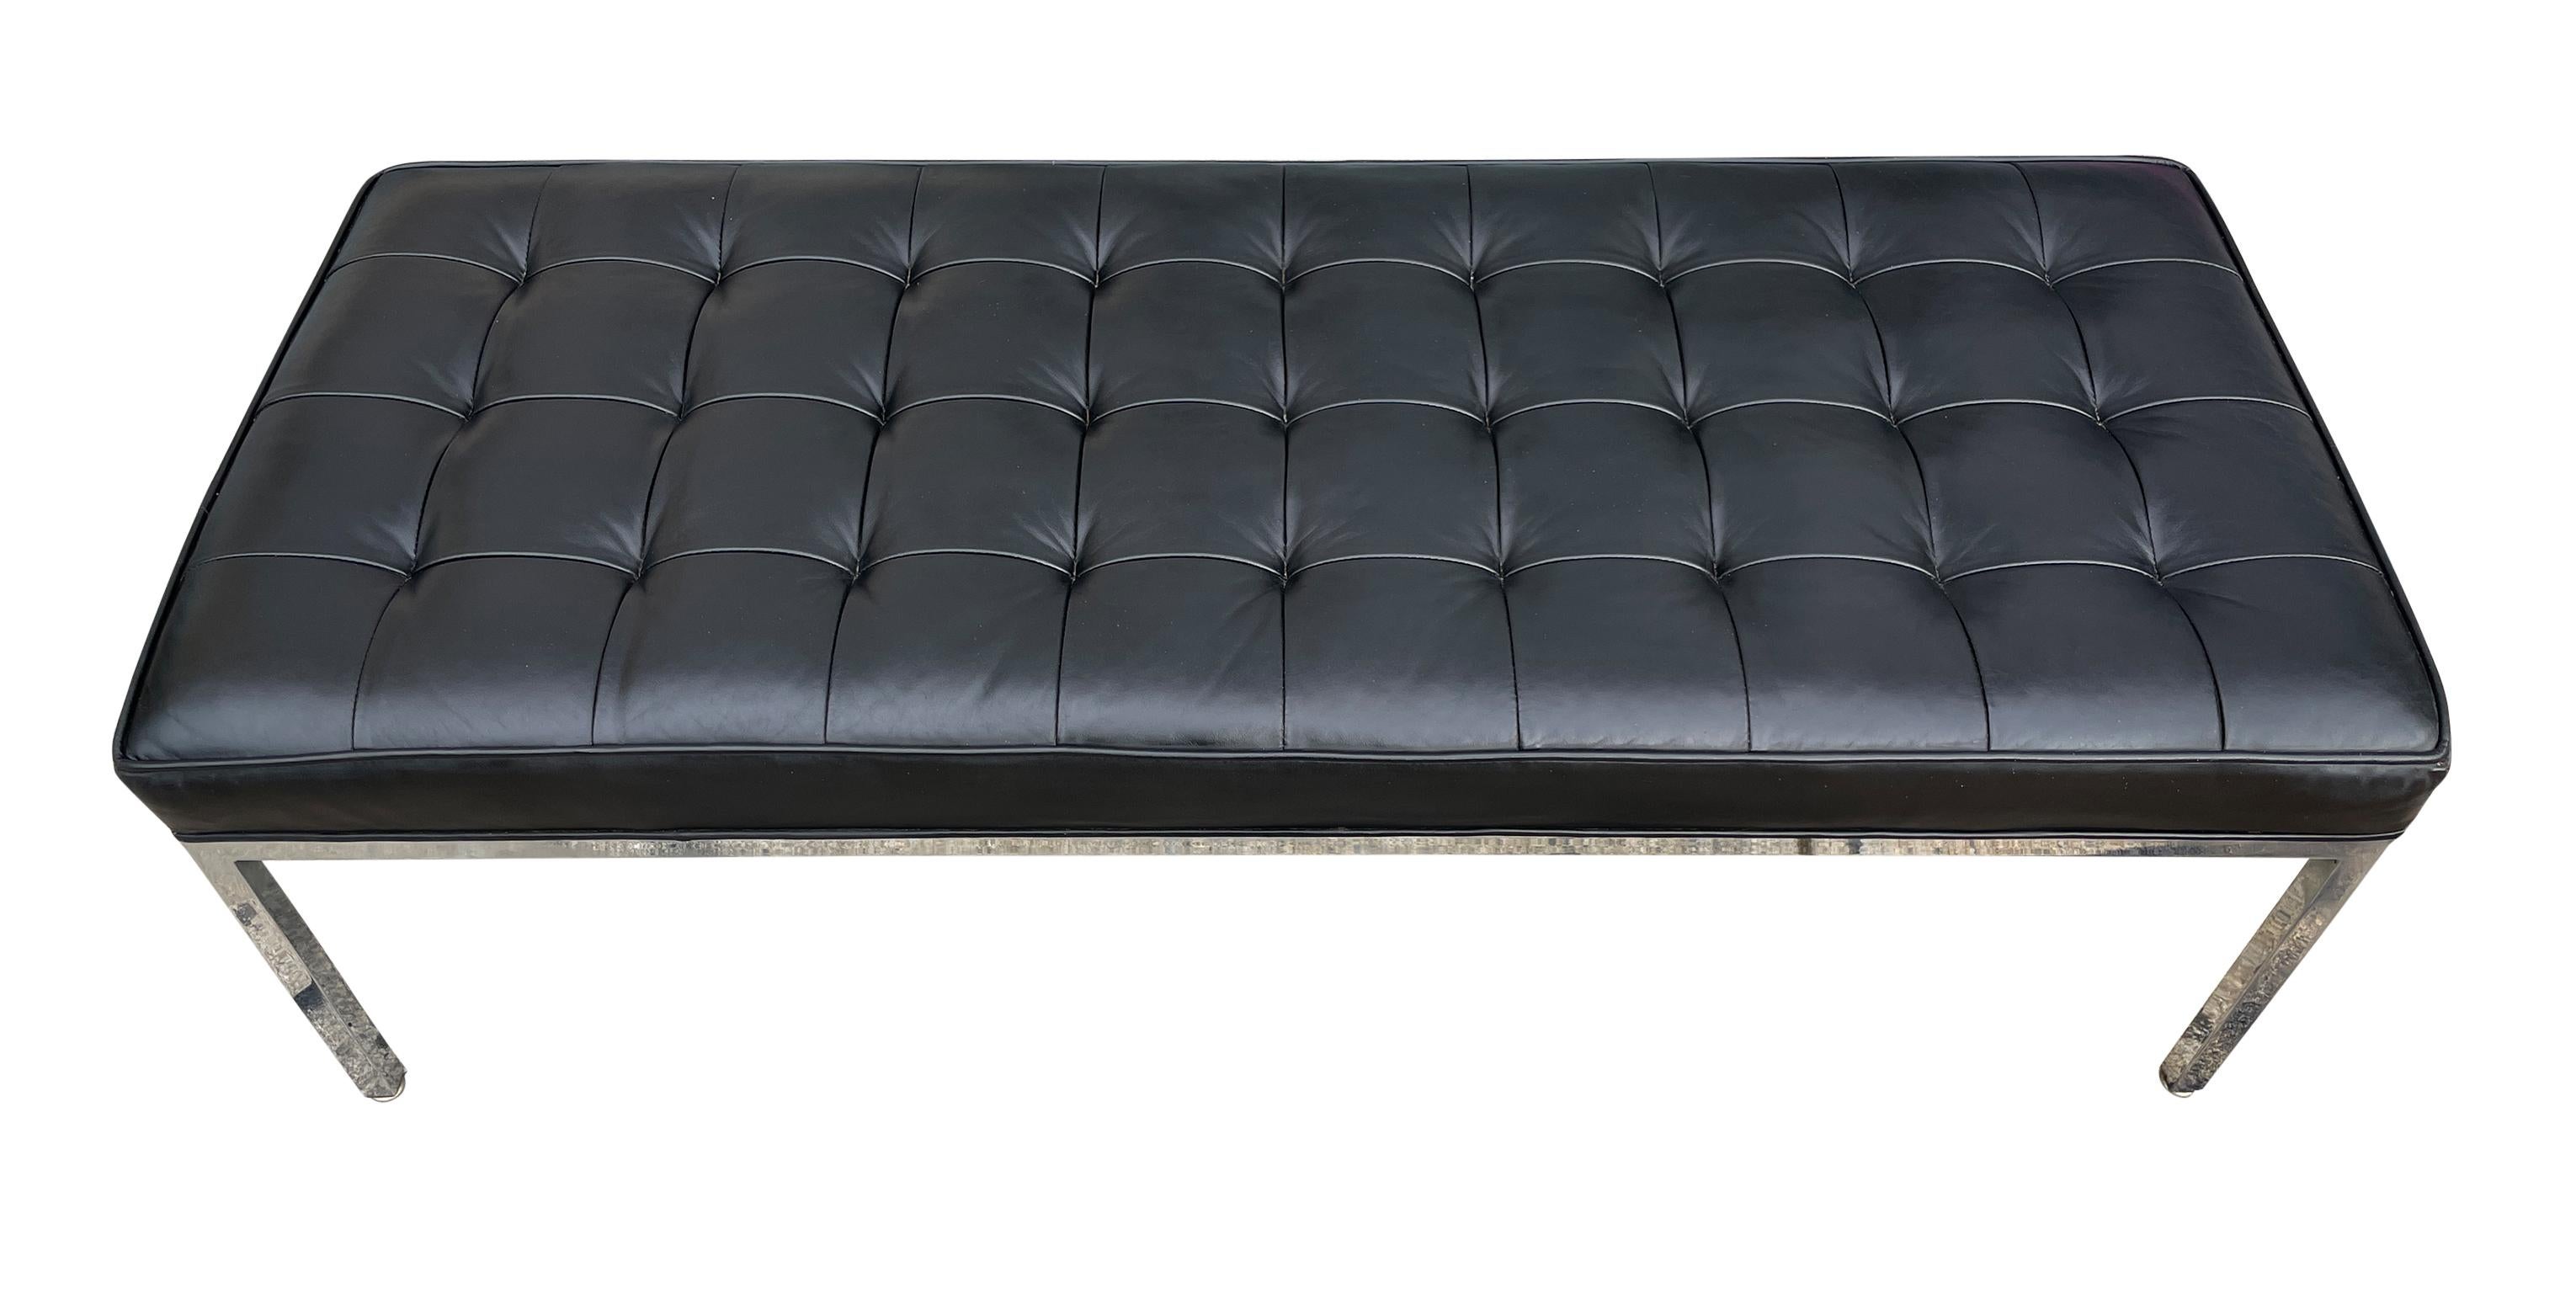 Beautiful Mid-Century Modern black leather bench chrome frame style of Florence Knoll. Very clean 1960s bench. Made by Mueller Furniture Company USA. Very High Quality construction leather and chrome are in great vintage condition nice and firm